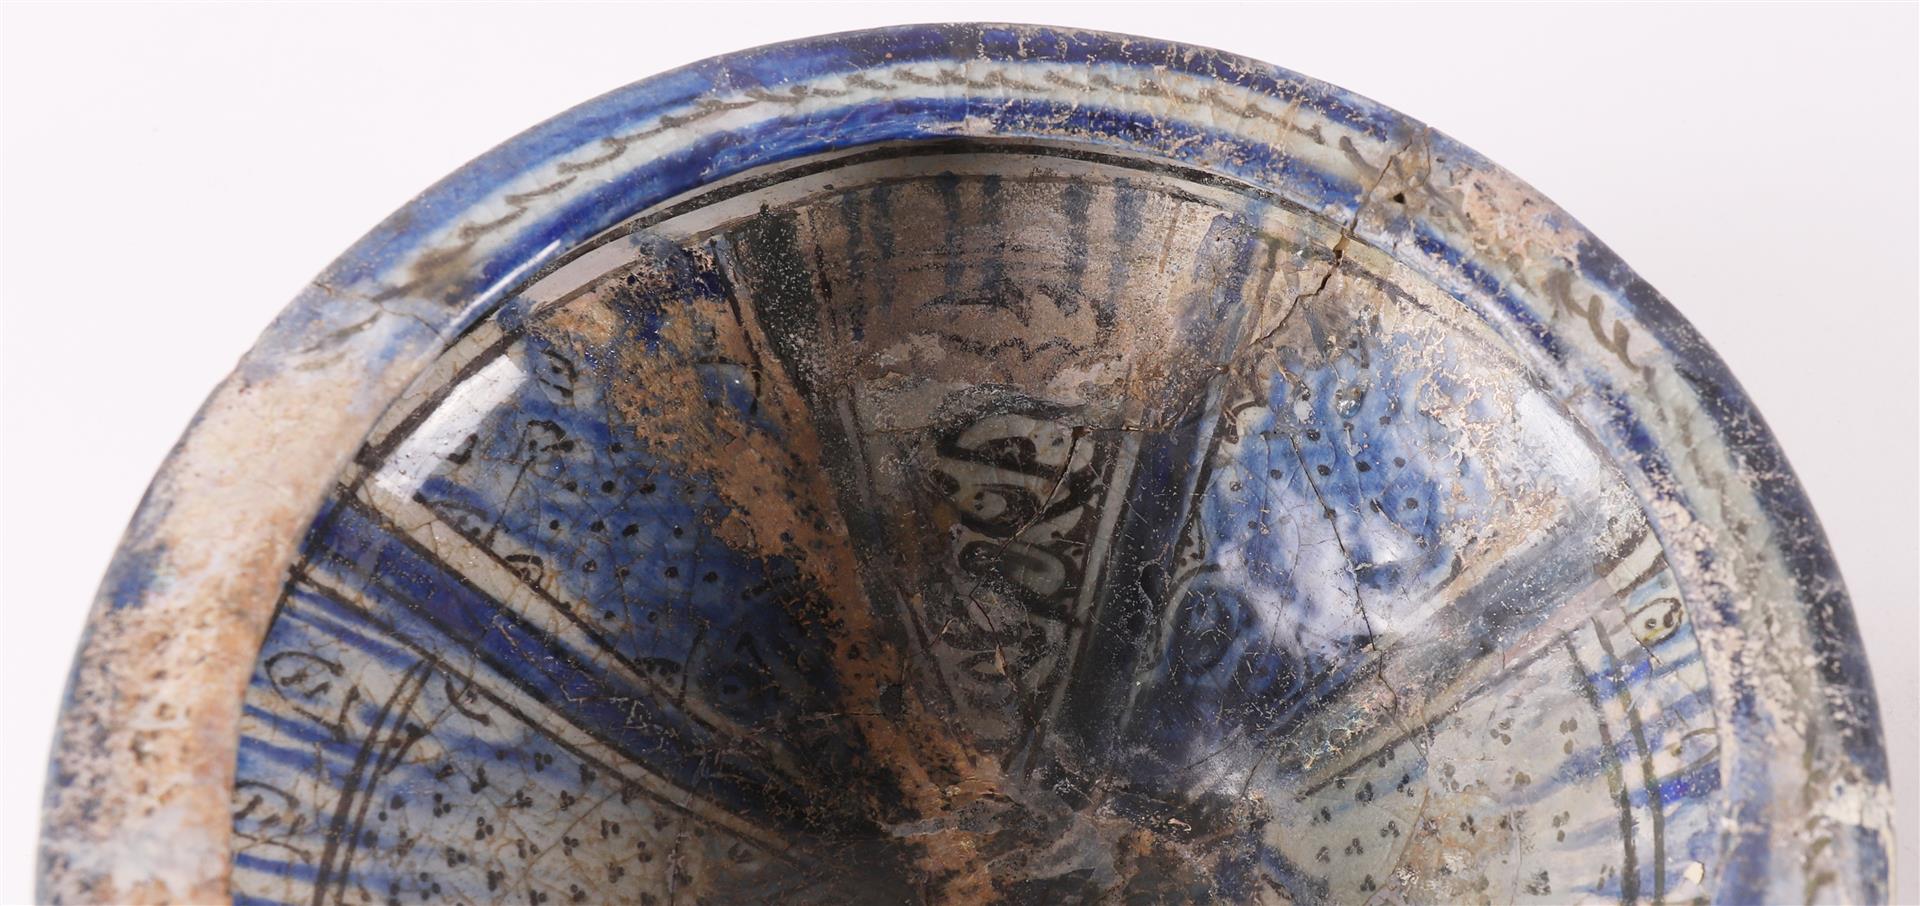 A blue glazed Persian earthenware bowl on base ring, 15th C. - Image 7 of 10